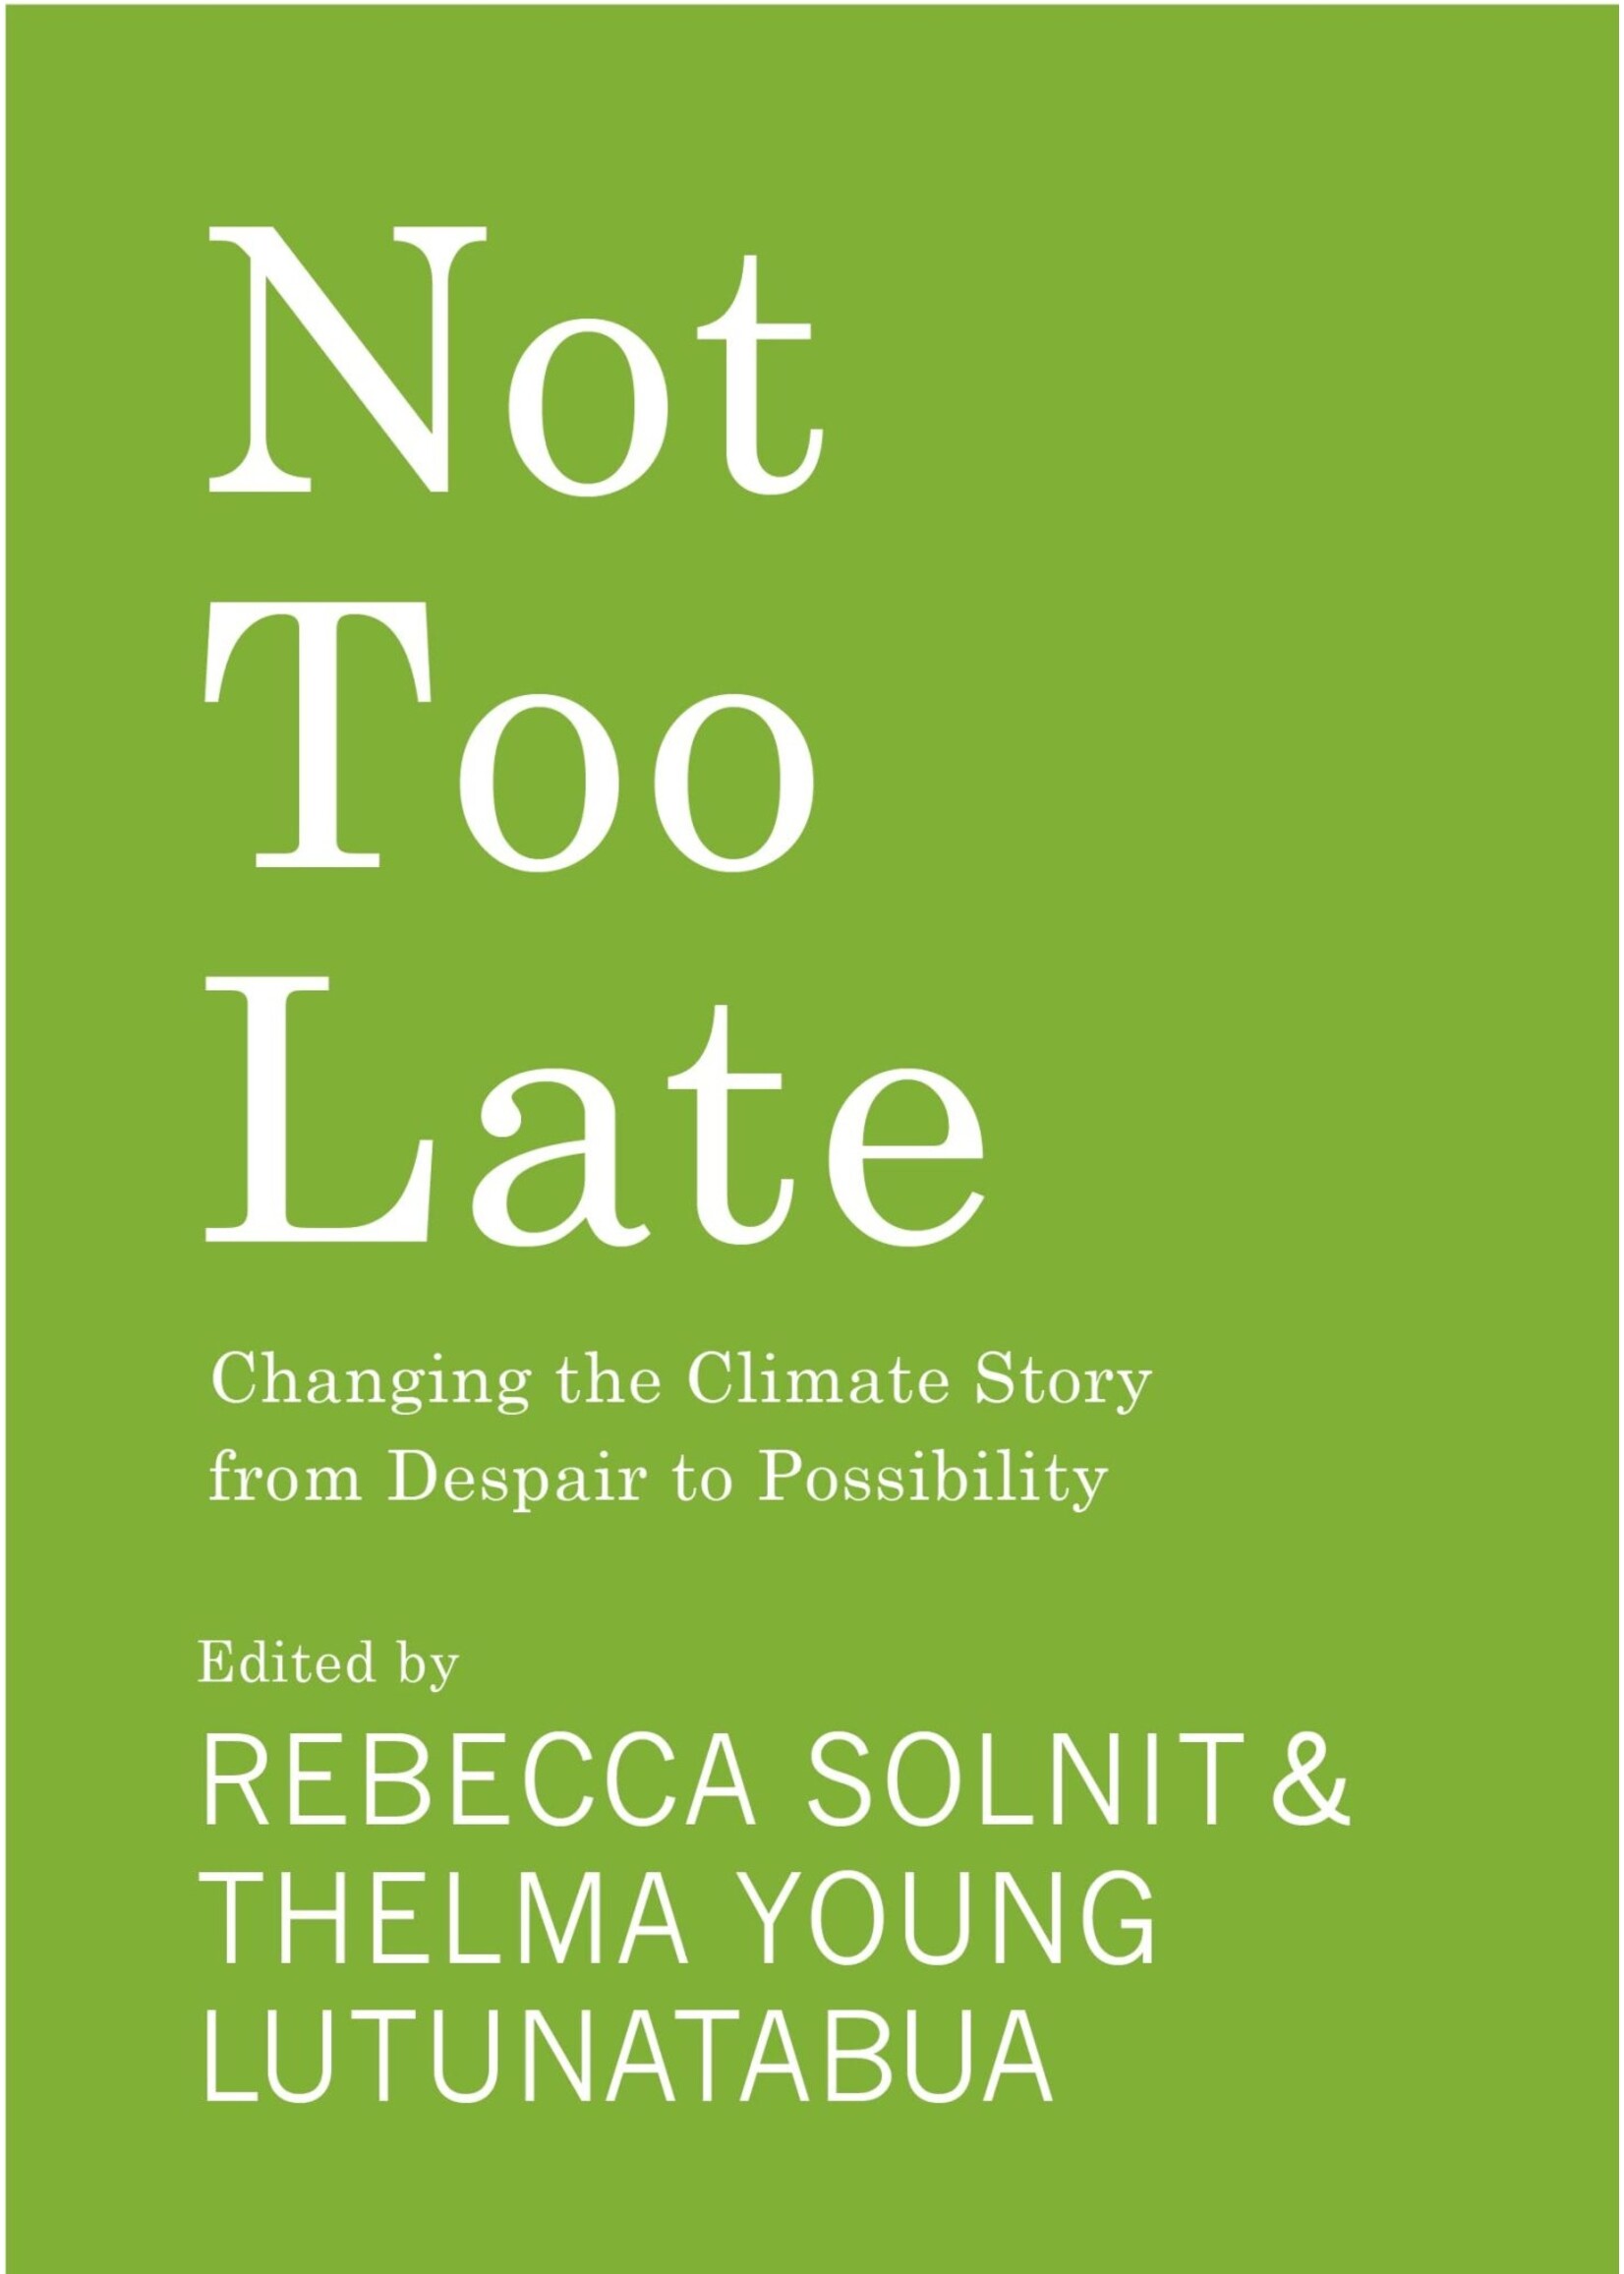 Not Too Late: Changing the Climate Story from Despair to Possibility by Rebecca Solnit